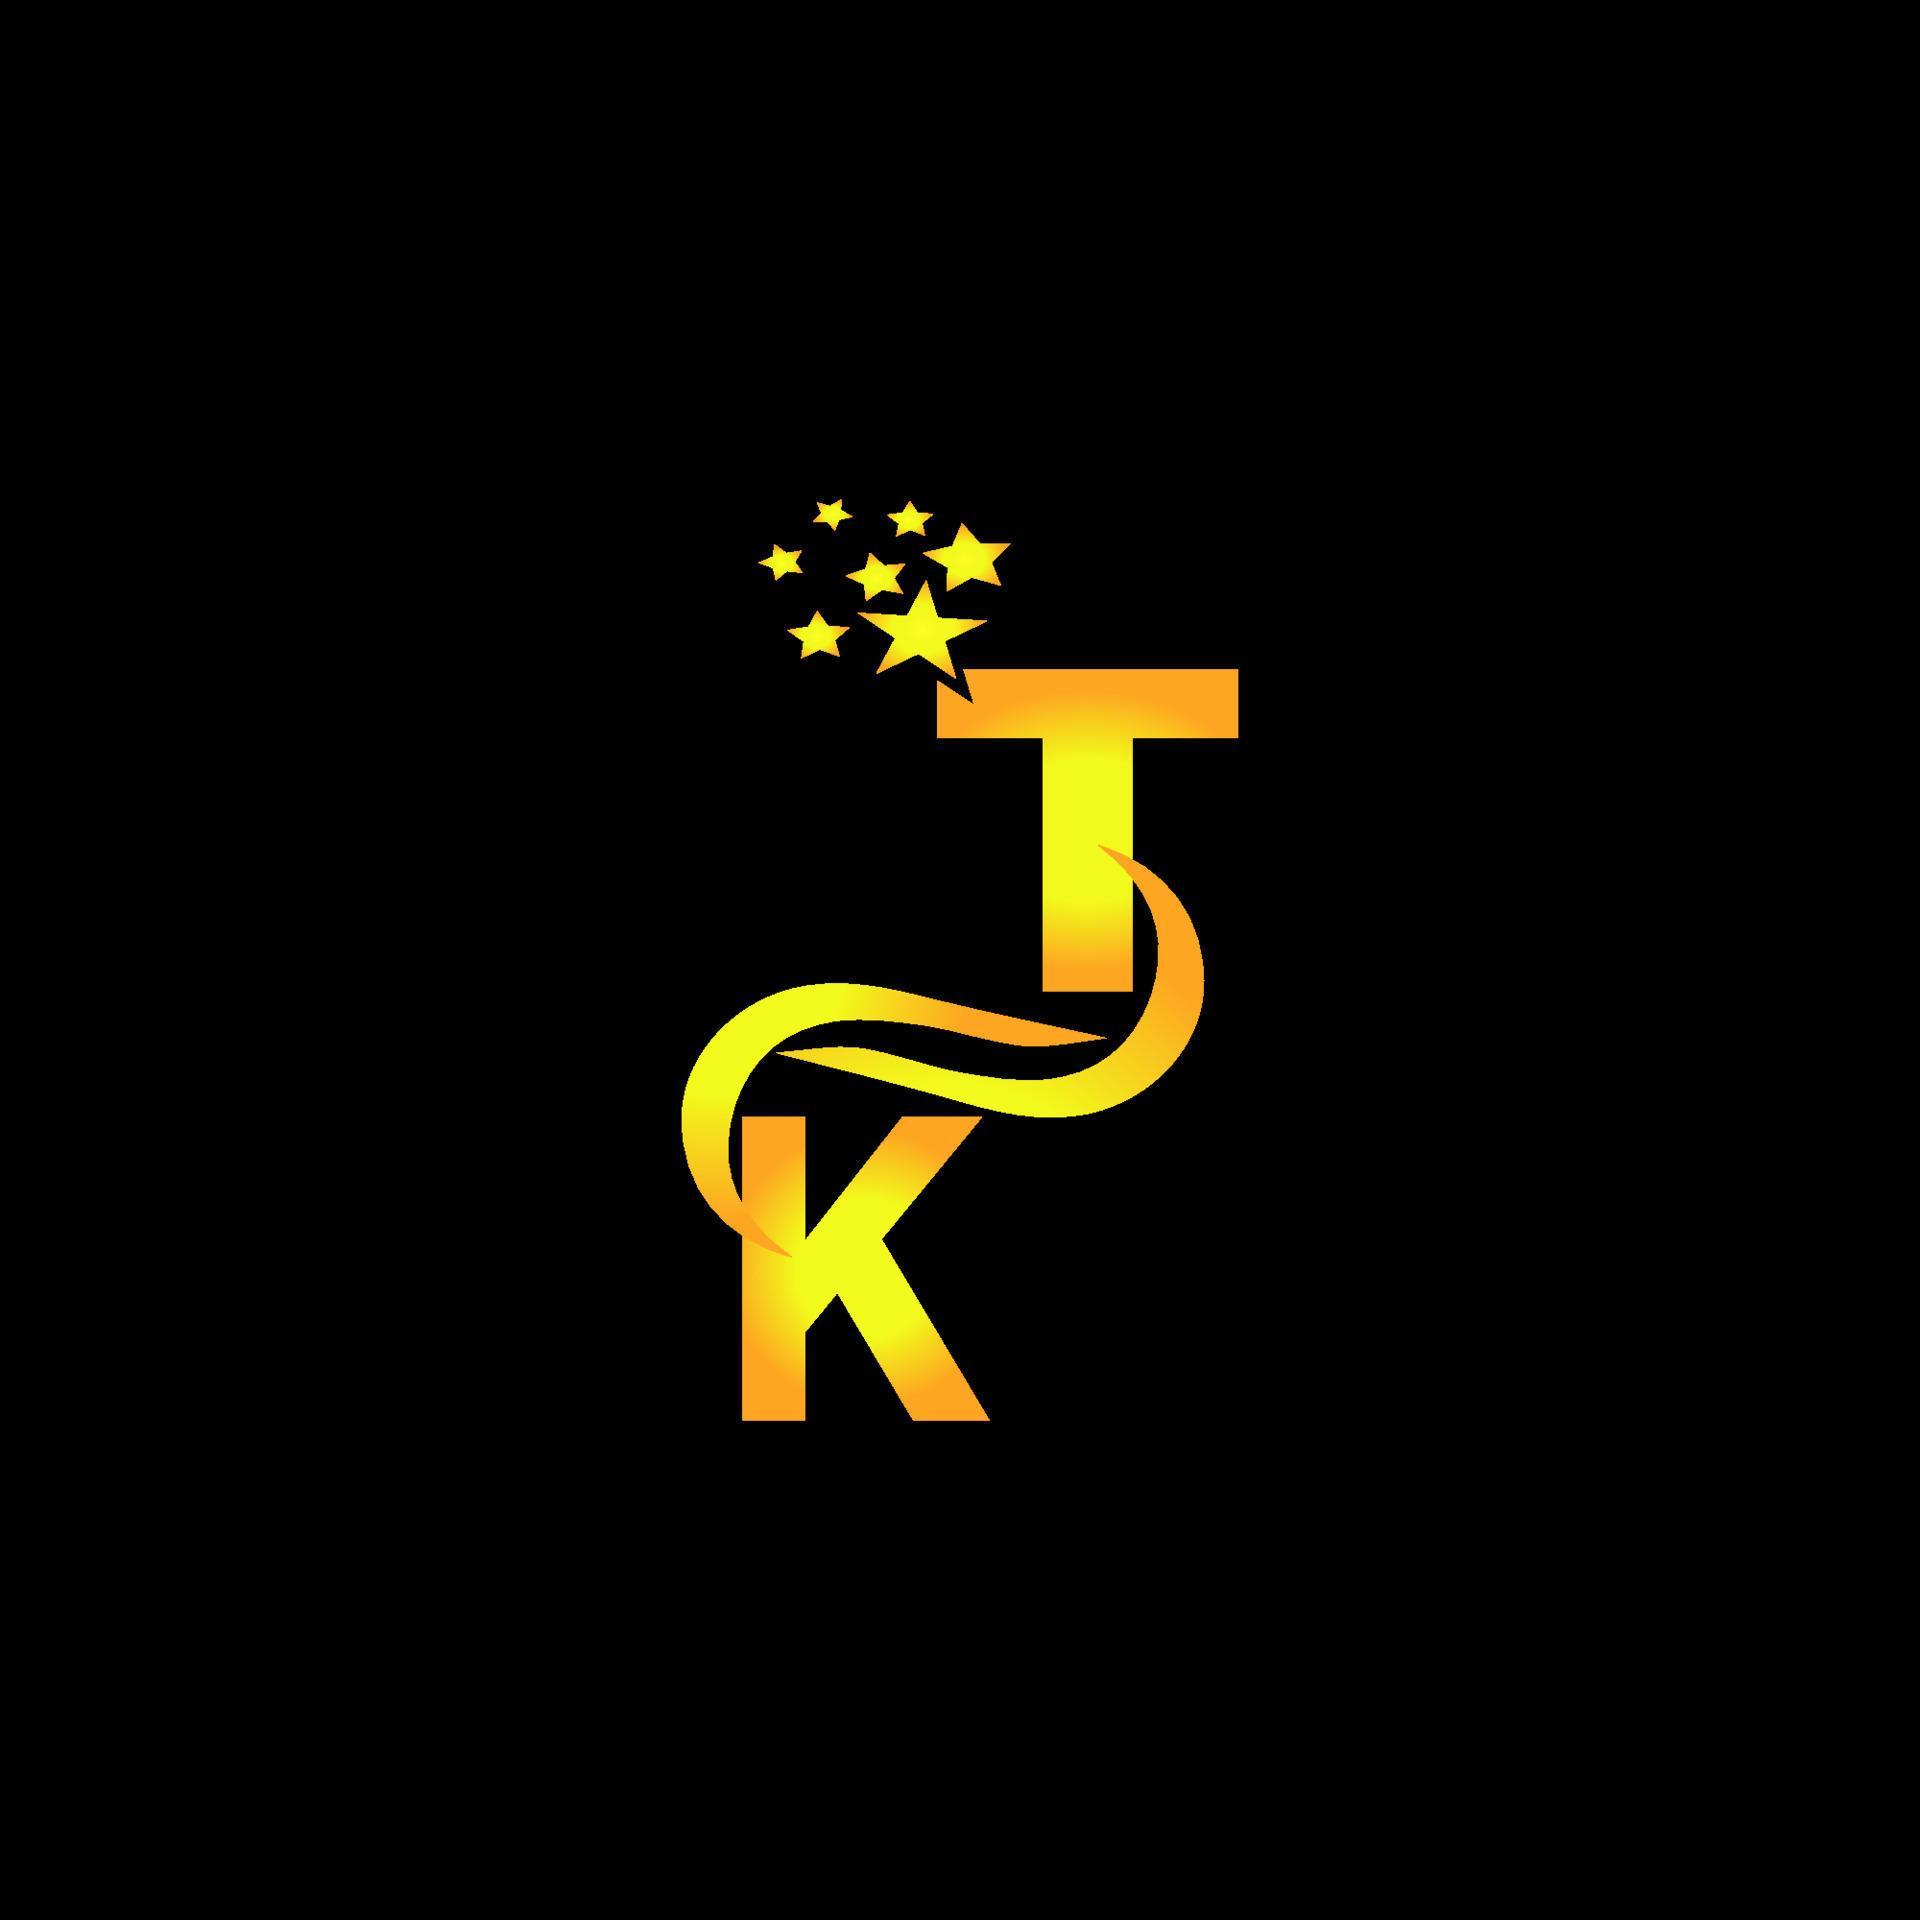 golden letter TK logo design with multi star for your company or ...